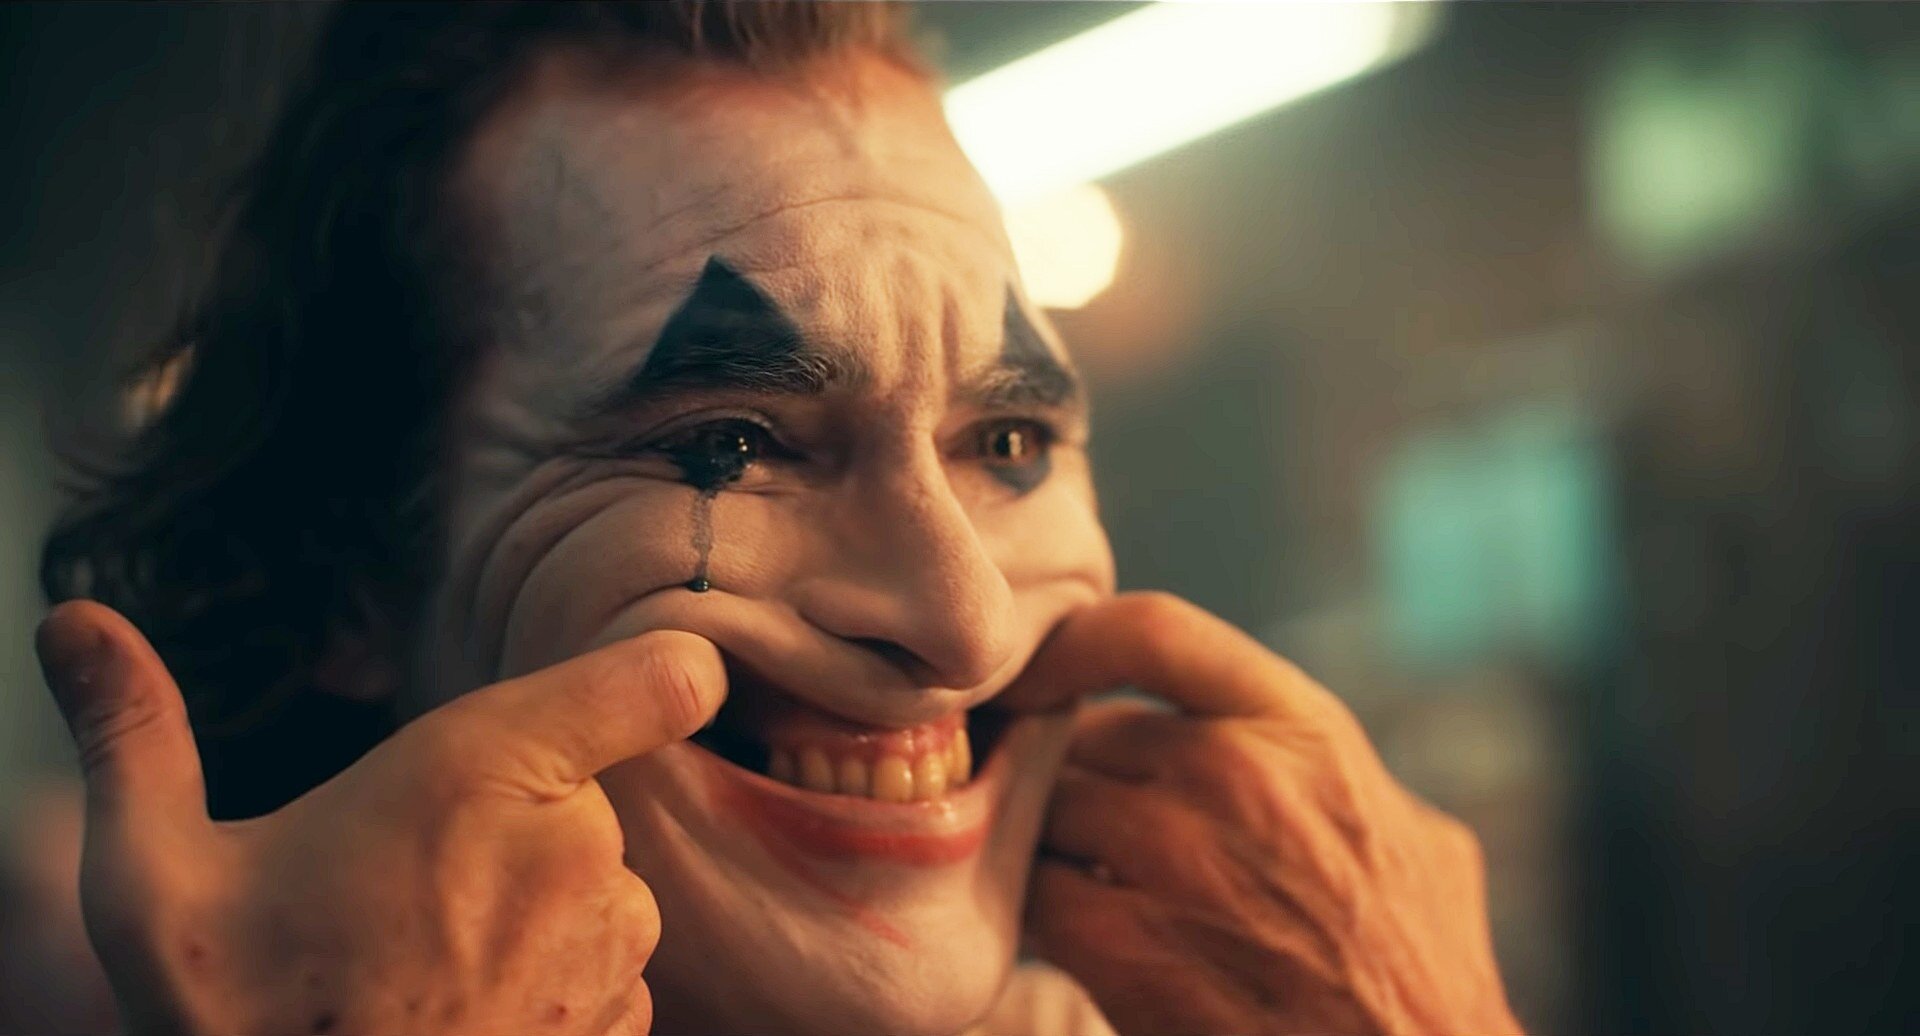 There's a Whole Movie About the Joker in the Works